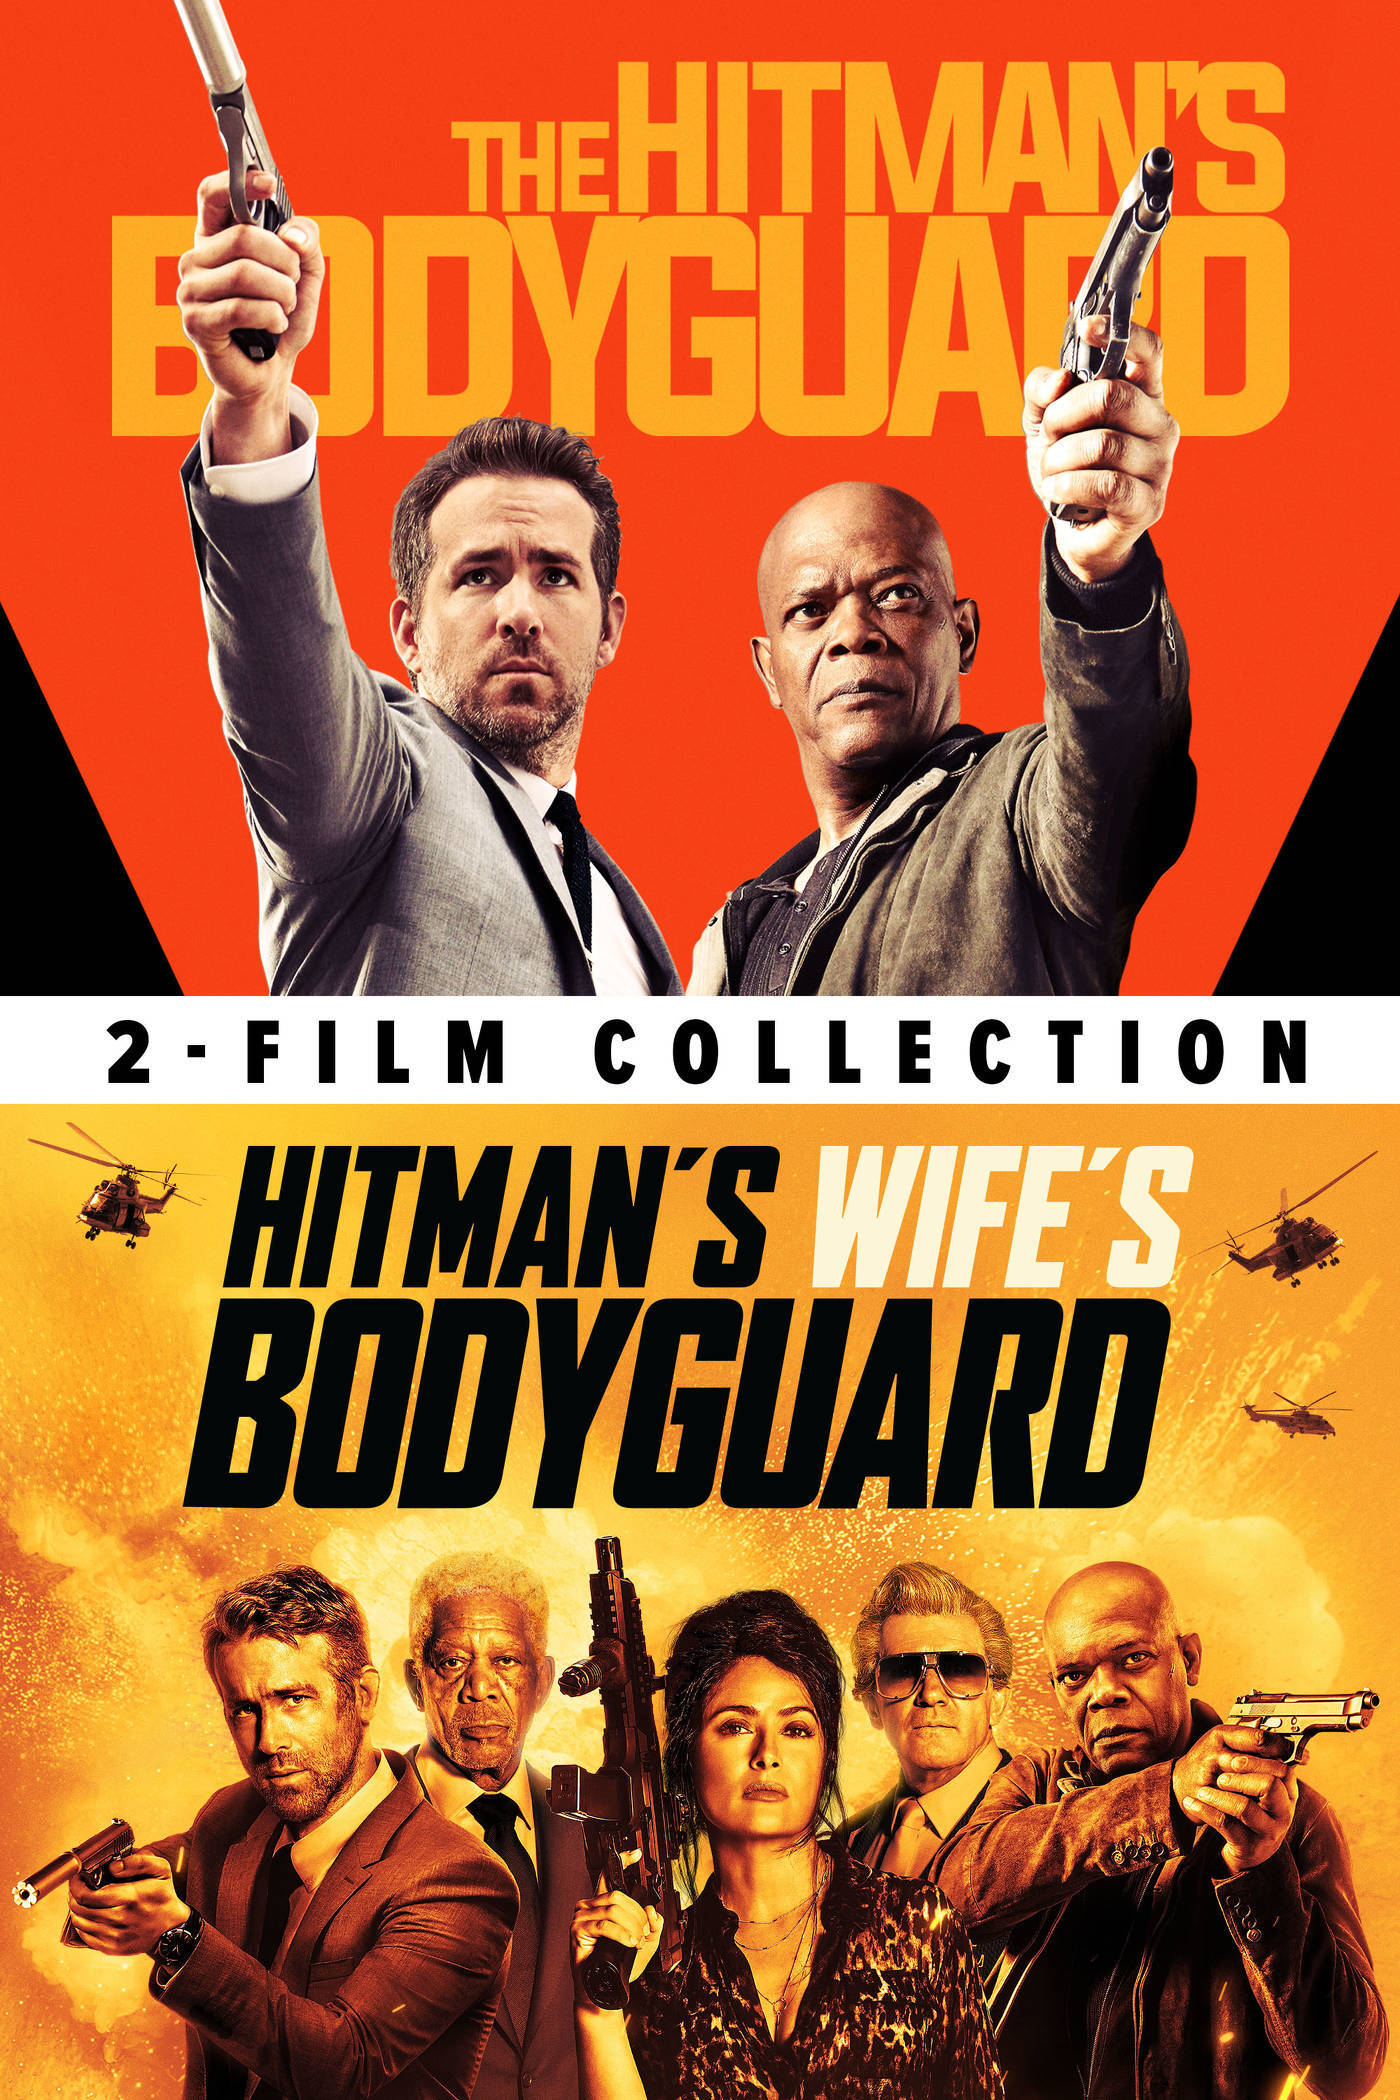 The Hitmans Bodyguard Movie Poster Wallpapers